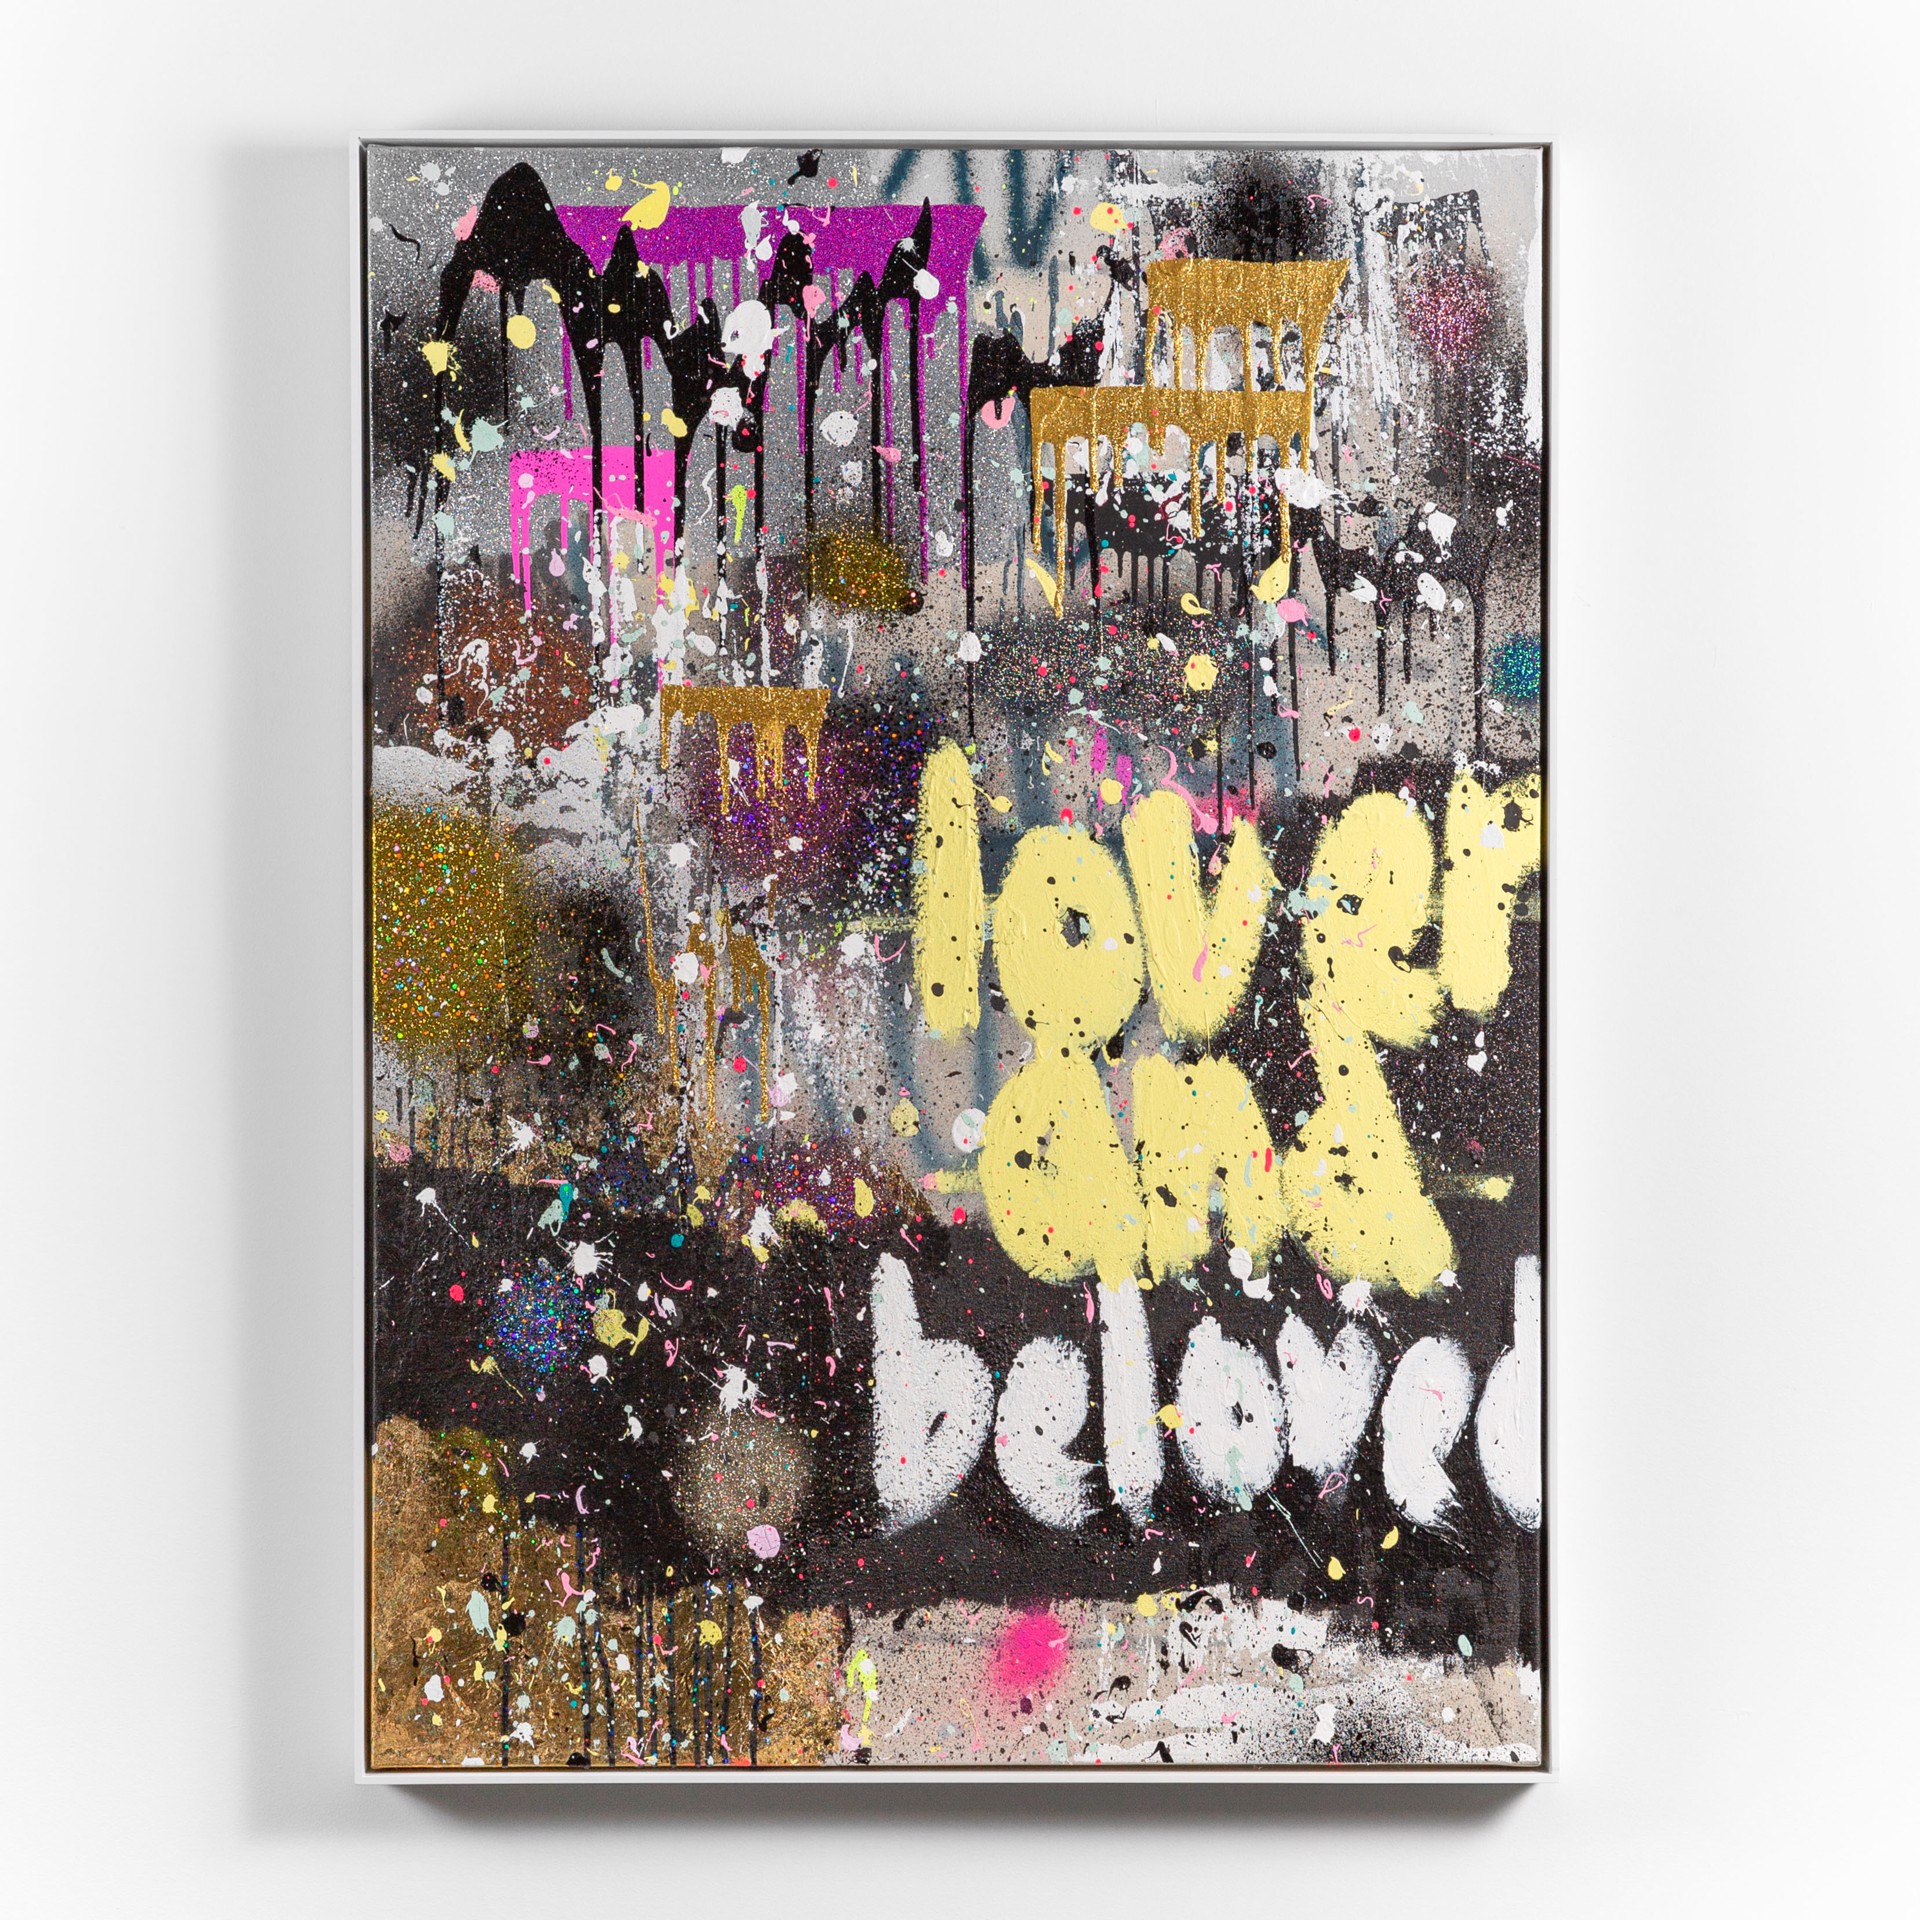 Lover and Beloved by Jeremy Brown